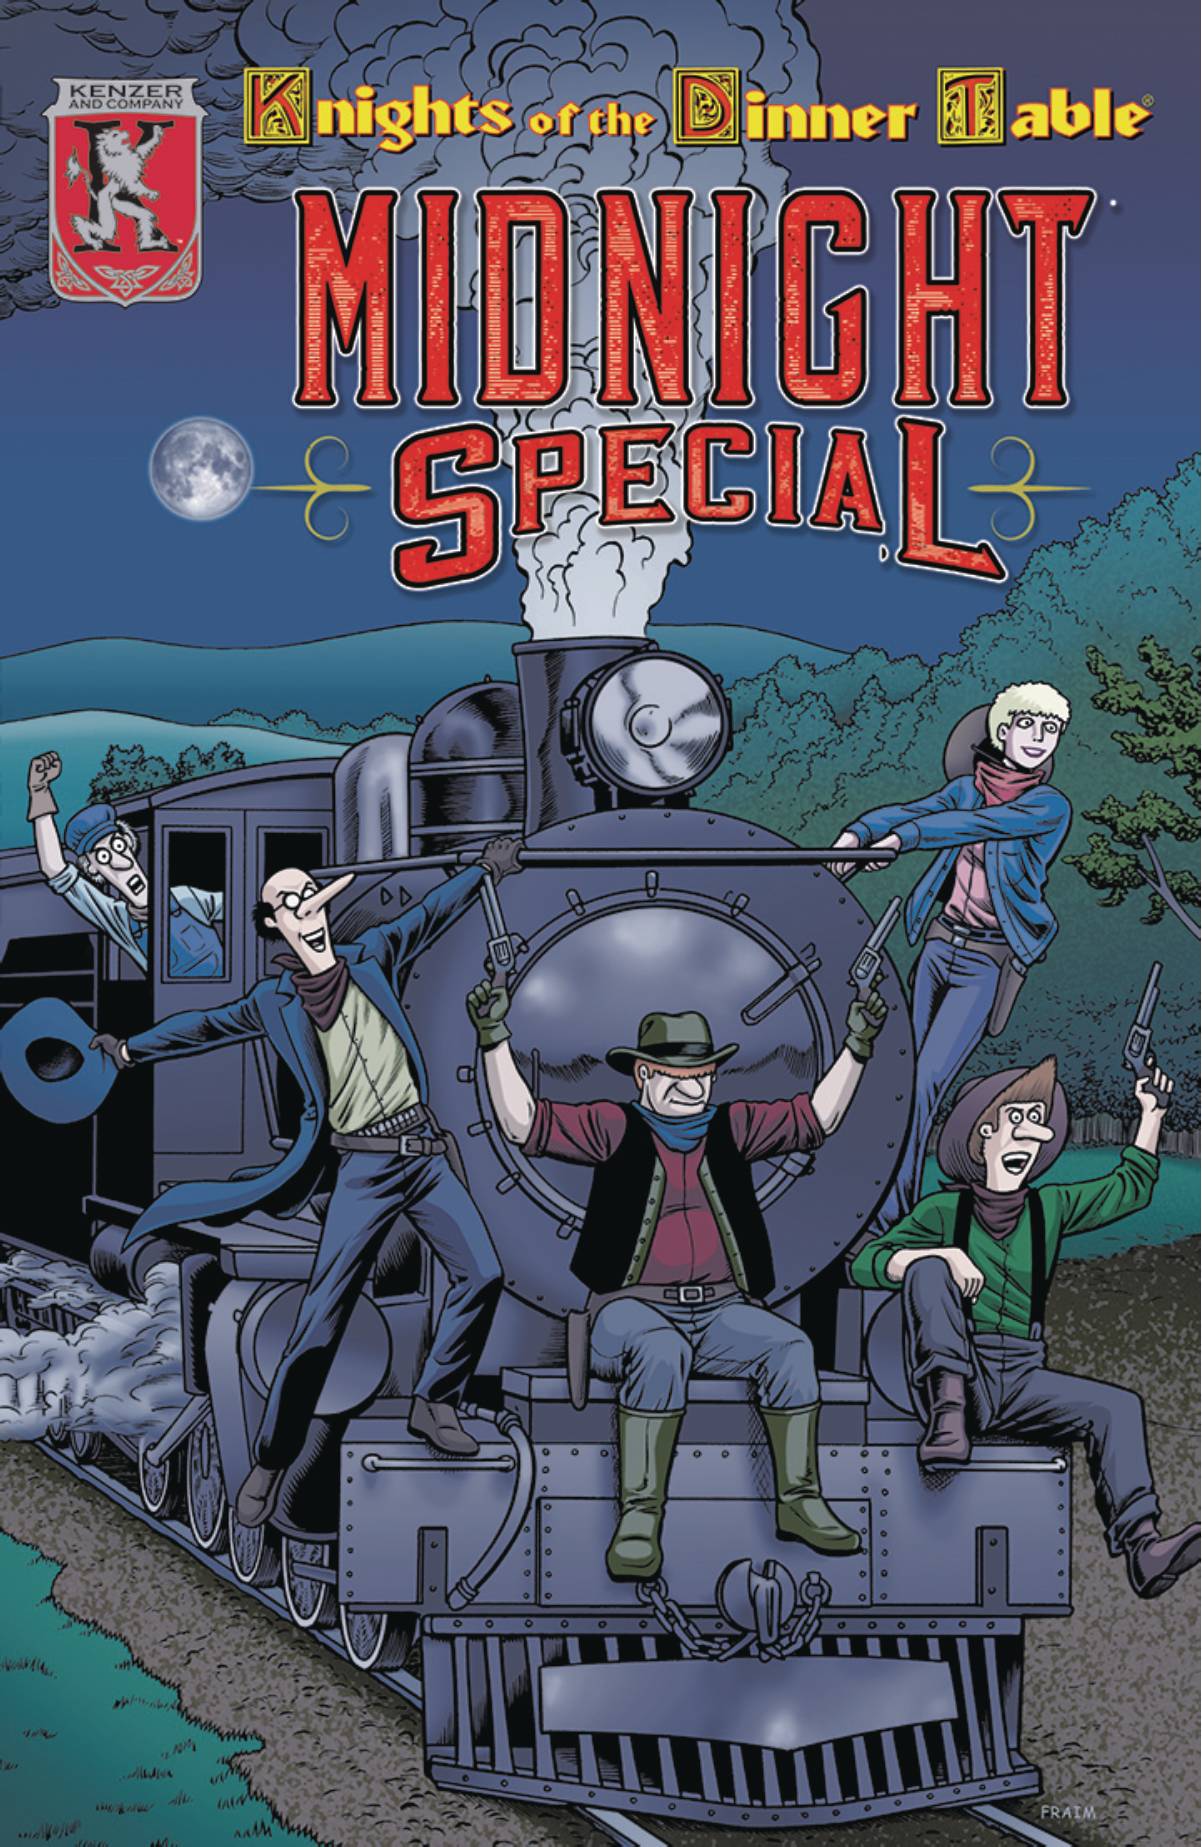 KNIGHTS OF THE DINNER TABLE MIDNIGHT SPECIAL TP